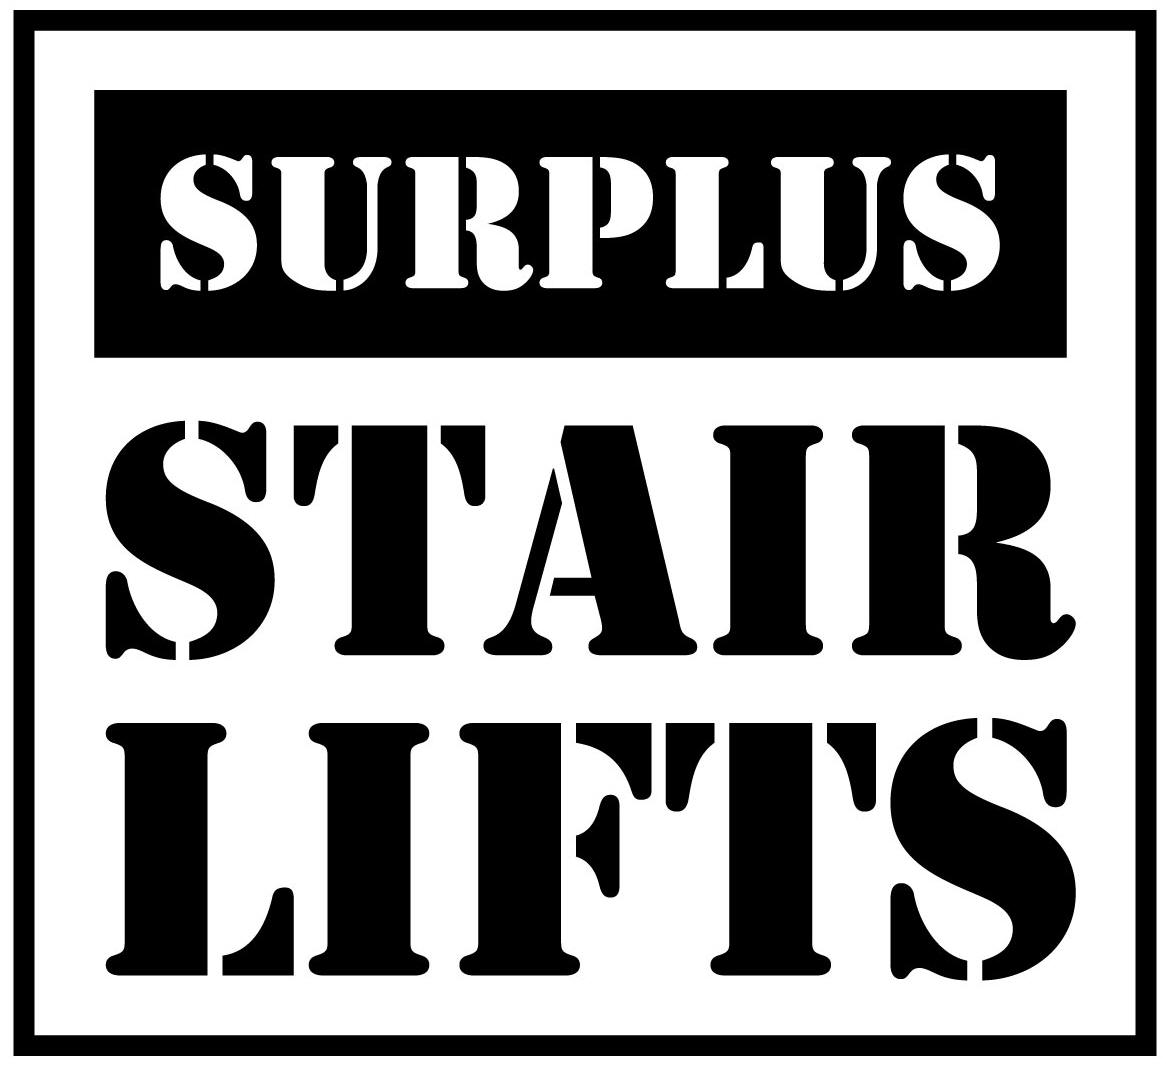 surplus Stairlifts buy sell Stairlift chairs